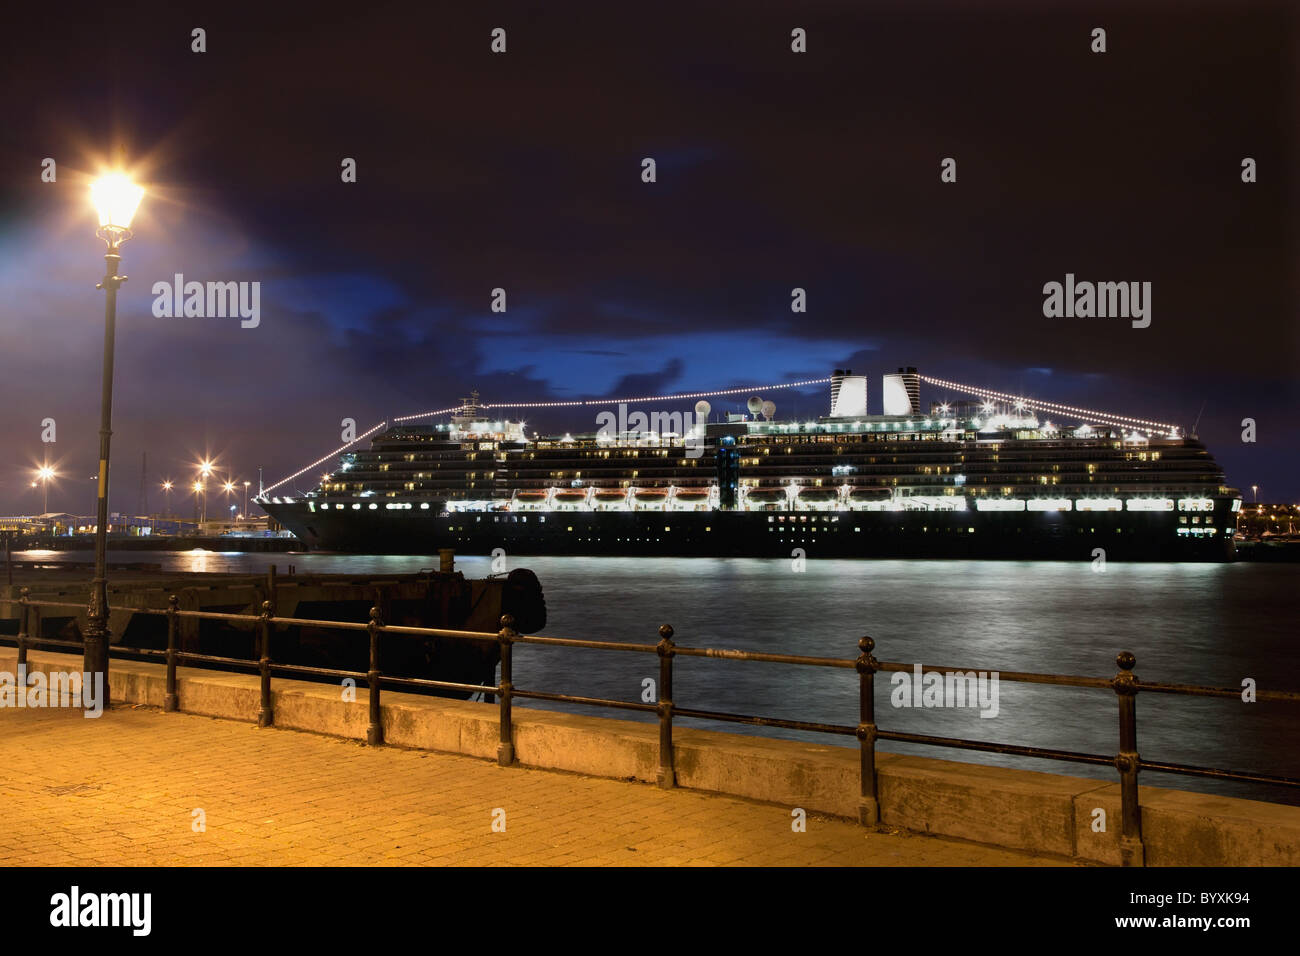 a cruise ship in the harbor illuminated at night; south shields, tyne and wear, england Stock Photo